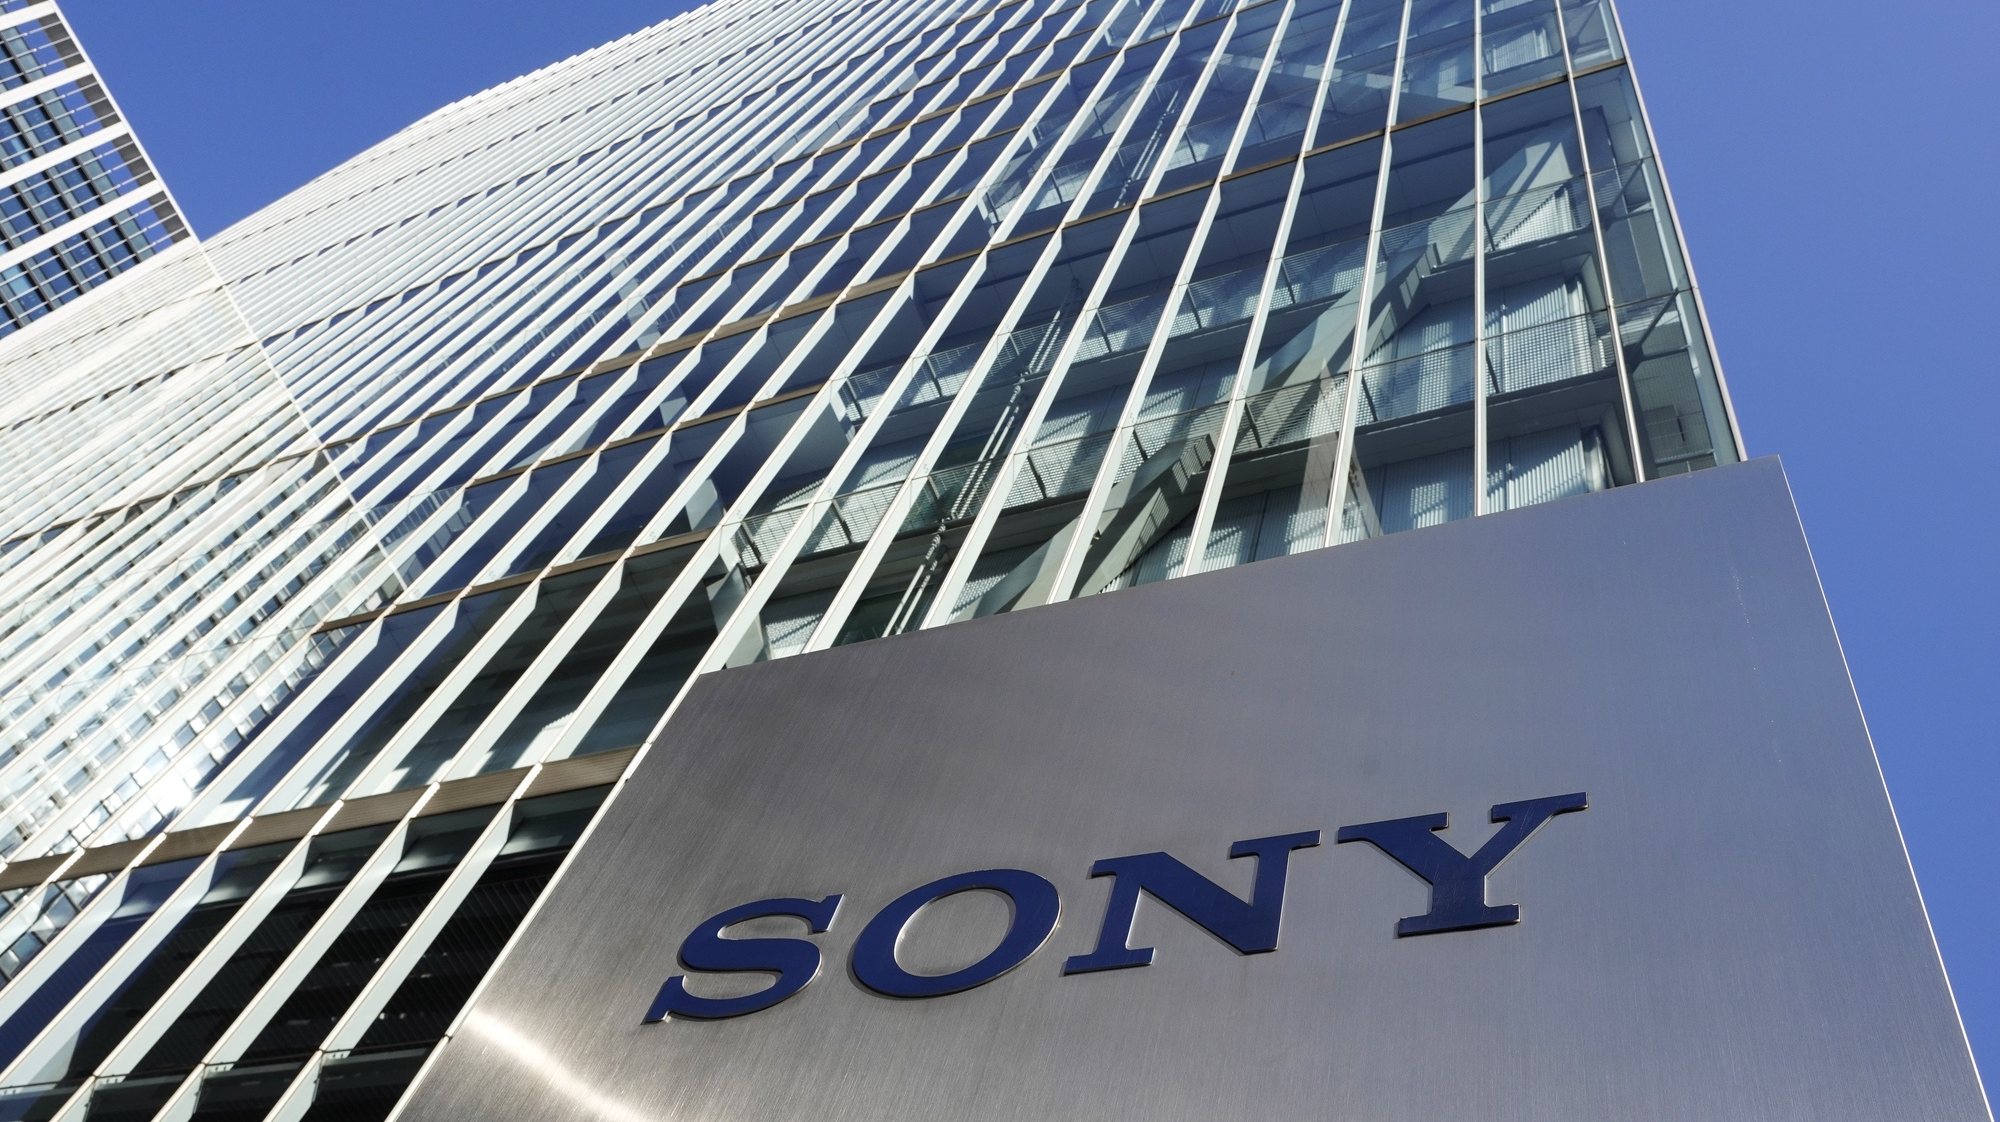 epa08983301 Exterior view of the headquarters of Sony Corp. in Tokyo, Japan, 03 February 2021. Sony will announce its 2020 Q3 results, as well as results from April to December 2020, on 03 February 2021.  EPA/KIMIMASA MAYAMA